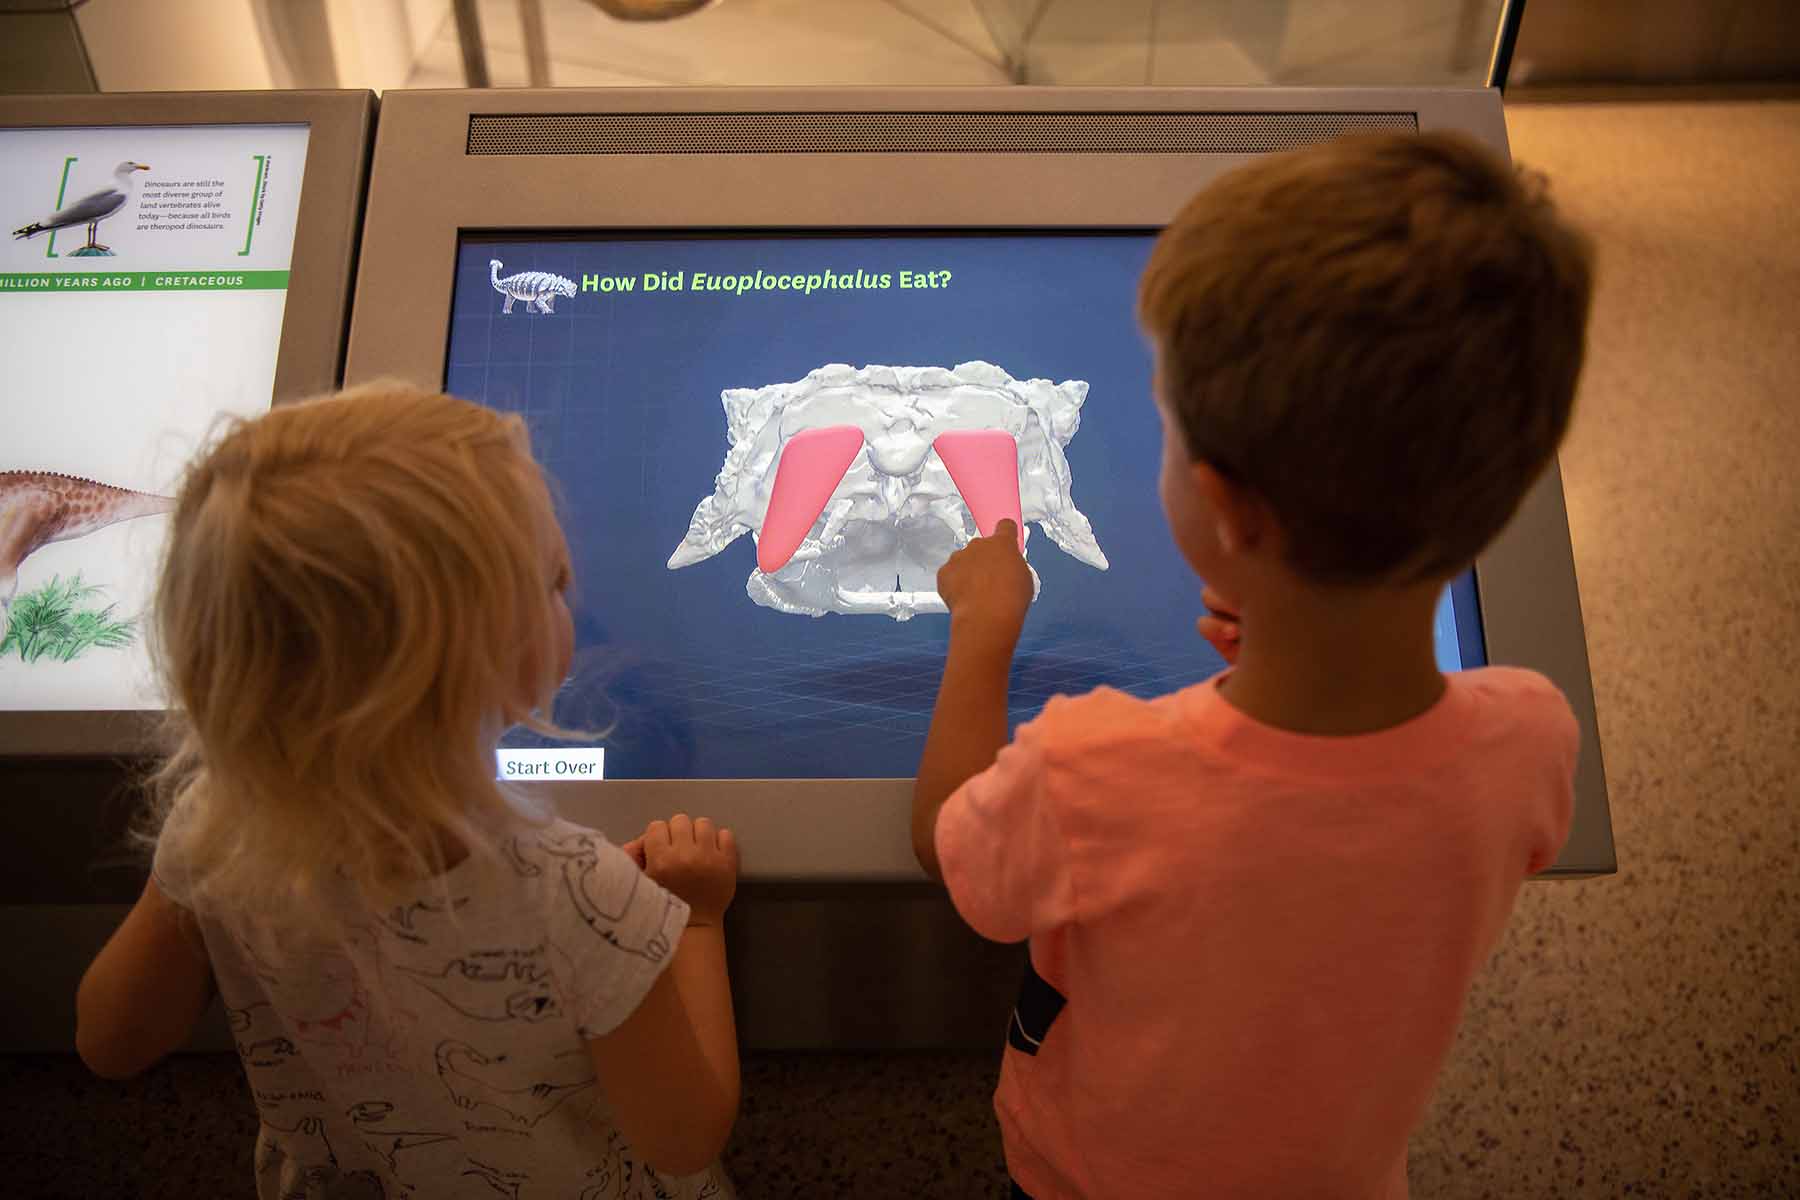 Children interacting with a computer simulation at the Smithsonian dinosaur exhibit